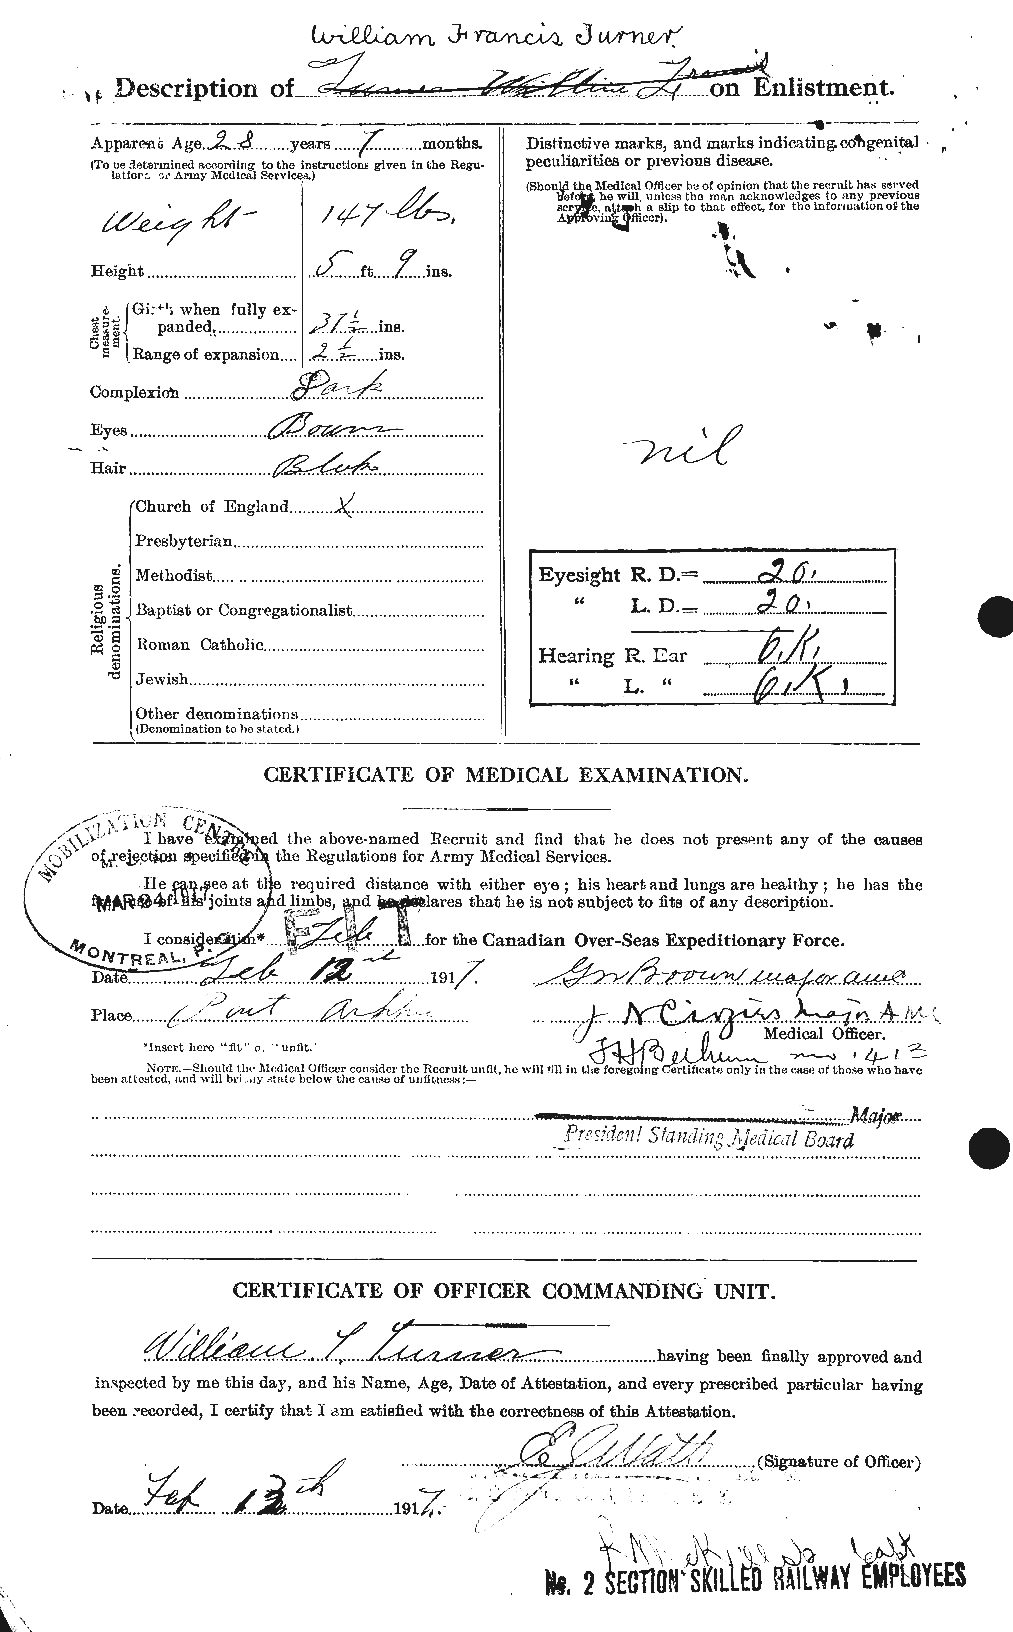 Personnel Records of the First World War - CEF 644027b